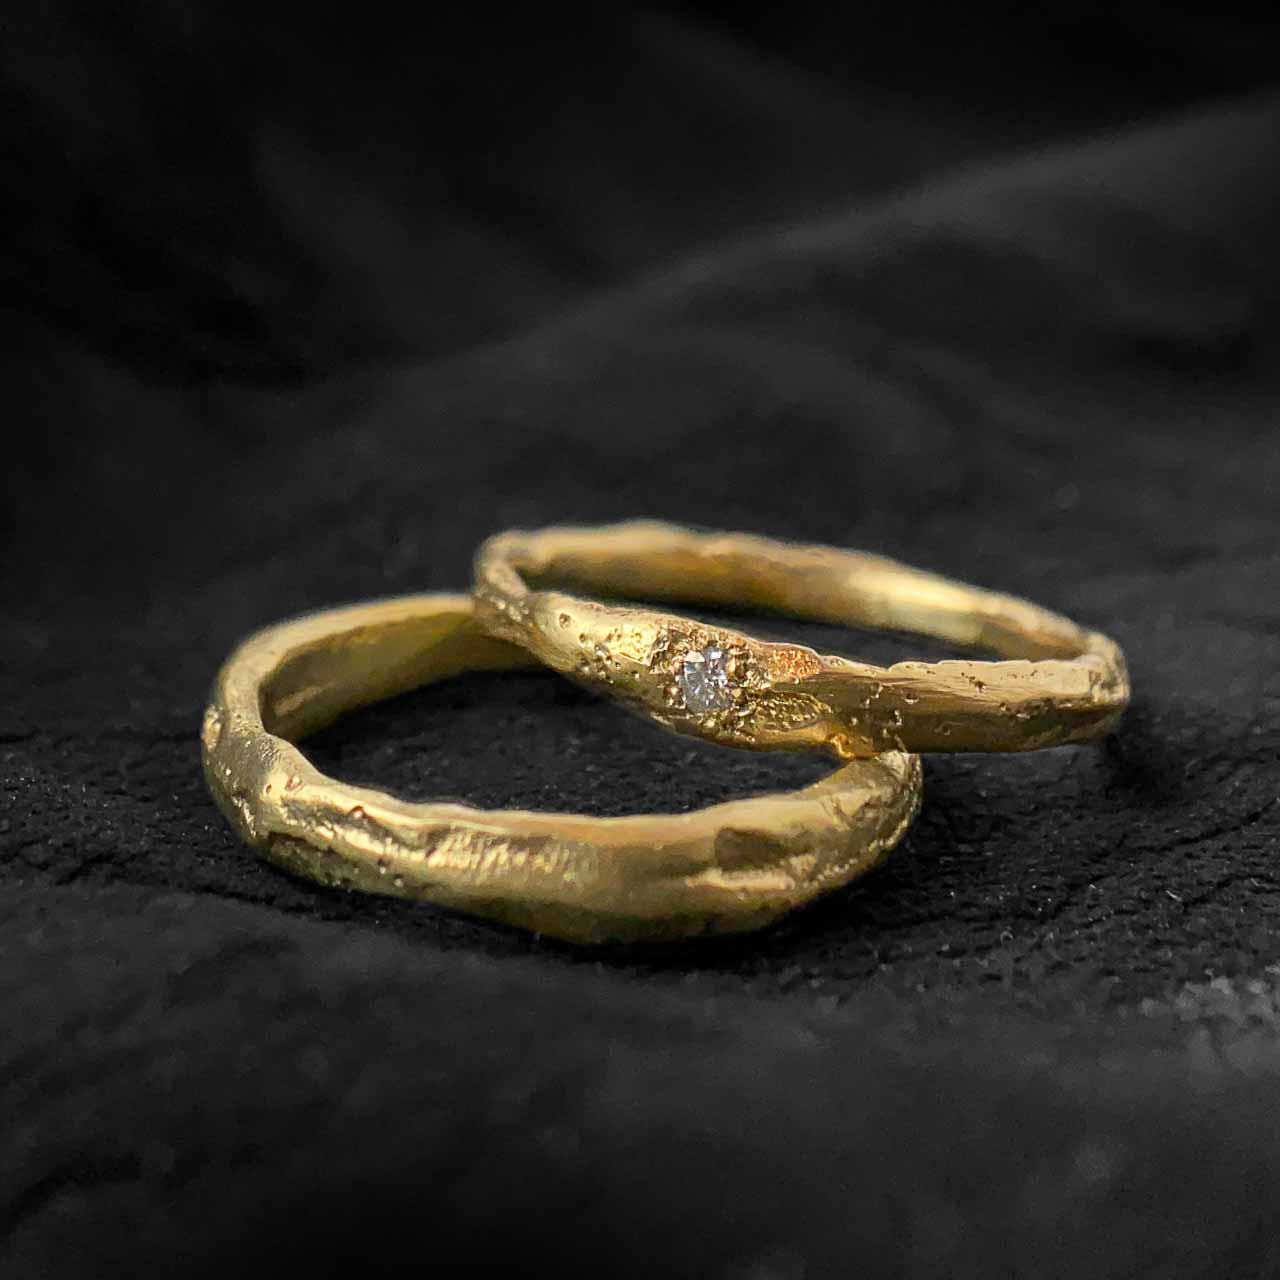 Two wedding bands in yellow gold on a dark background